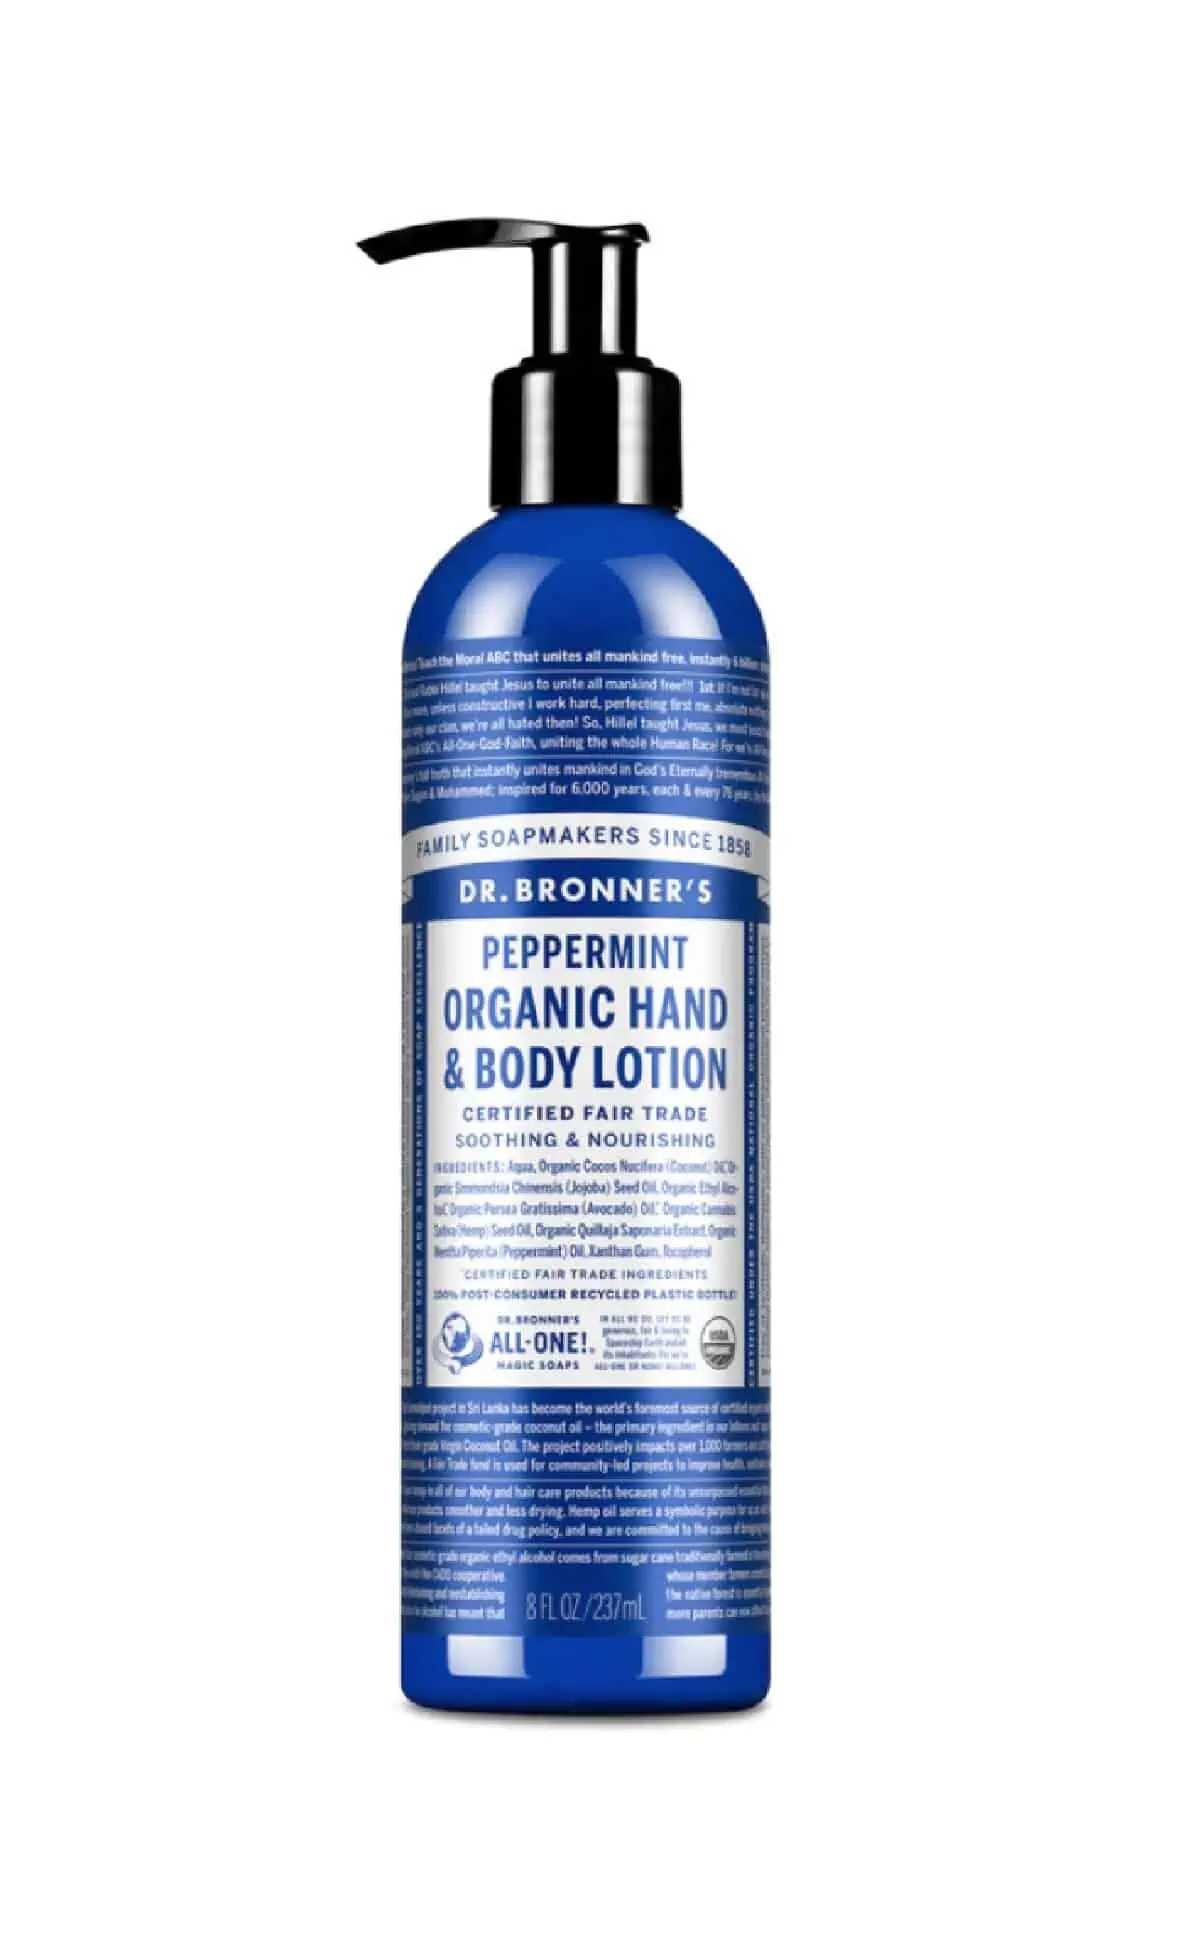 A royal blue bottle of Dr. Bronner's Organic Hand and Body Lotion with black lotion cap against a white background.